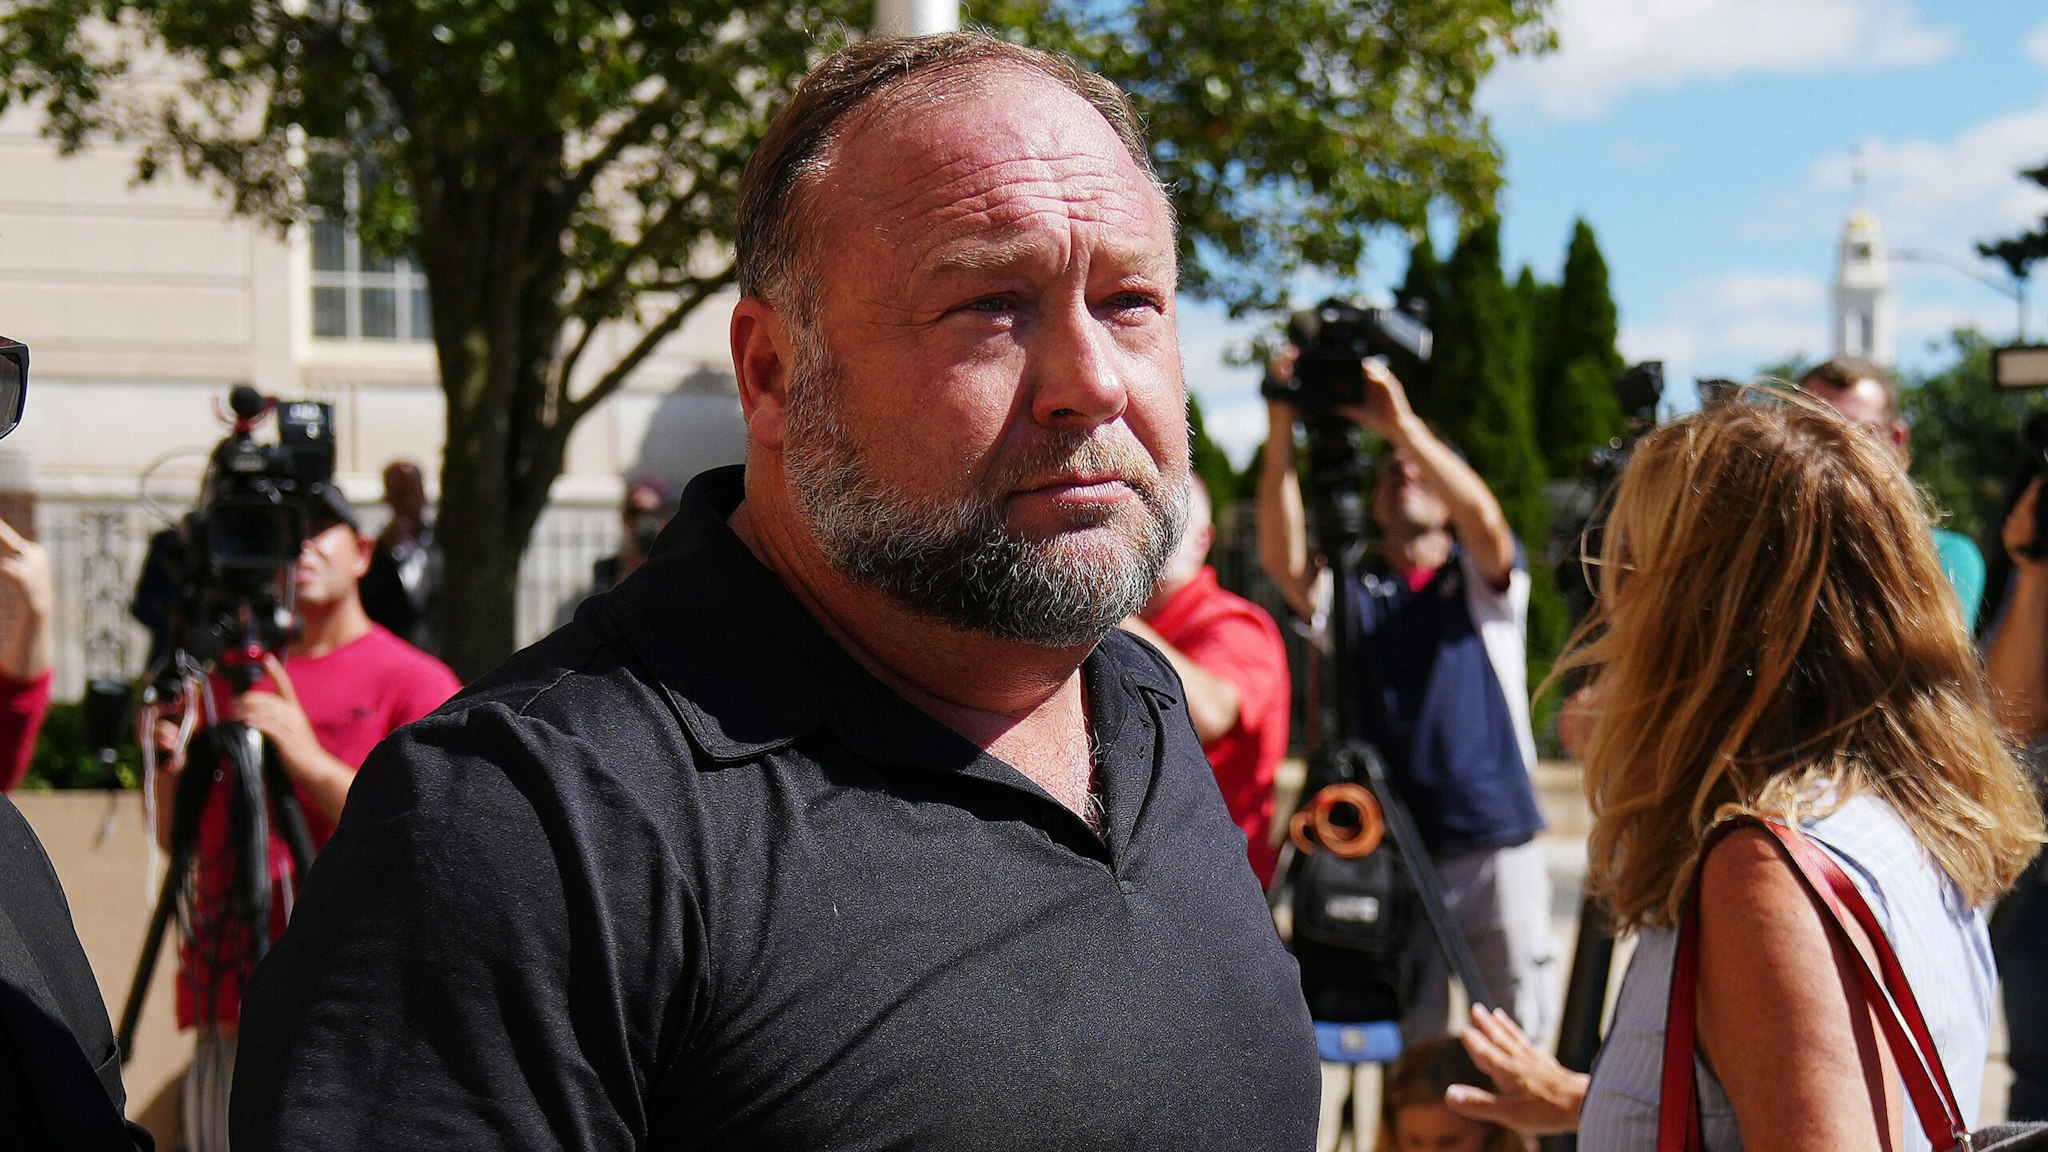 WATERBURY, CONNECTICUT - SEPTEMBER 21: InfoWars founder Alex Jones walks outside Waterbury Superior Court during his trial on September 21, 2022 in Waterbury, Connecticut. Jones is being sued by several victims' families for causing emotional and psychological harm after they lost their children in the Sandy Hook massacre. A Texas jury last month ordered Jones to pay $49.3 million to the parents of 6-year-old Jesse Lewis, one of 26 students and teachers killed in the shooting in Newtown, Connecticut.